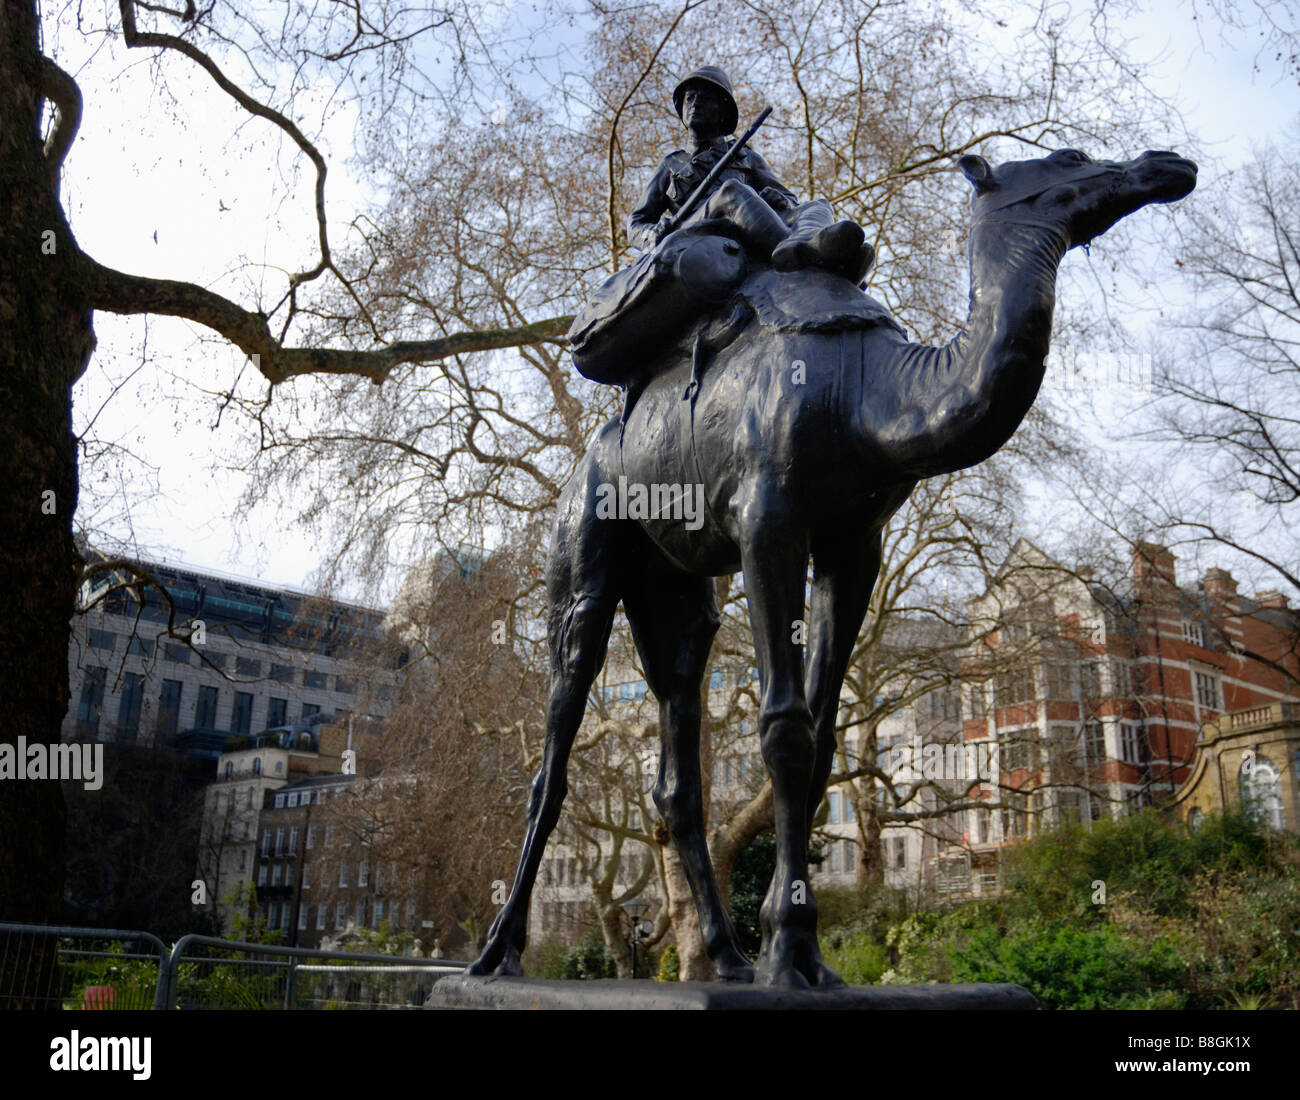 World War 1 memorial statue of soldier on camel Stock Photo